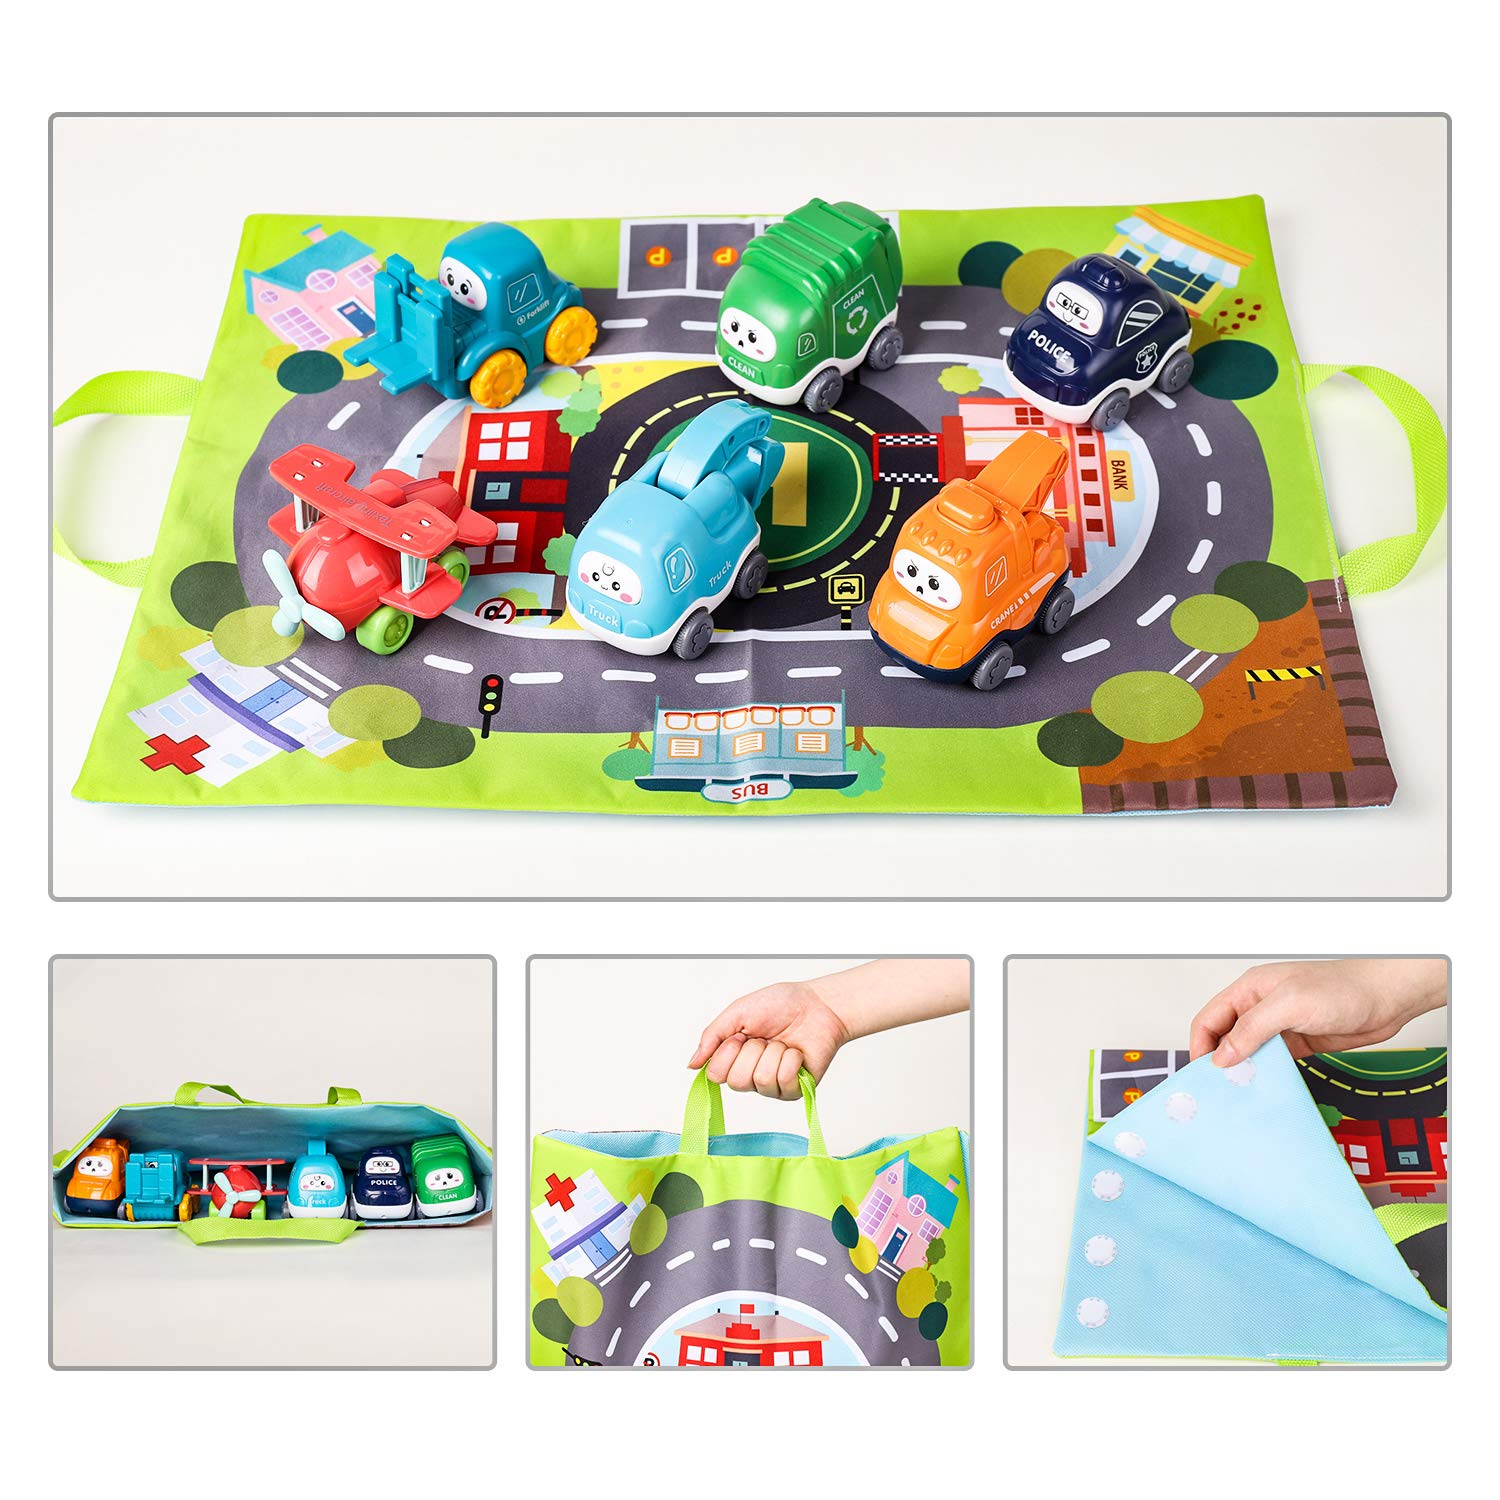 ALASOU 2021 Edition Baby Truck car Toy Sets and playmat/Storage Bag for Toddler | Baby Toys 12 - 18 Months | Toys for 1 2 3 Year Old boy| Birthday Gifts for Infant Toddlers(6 Sets)